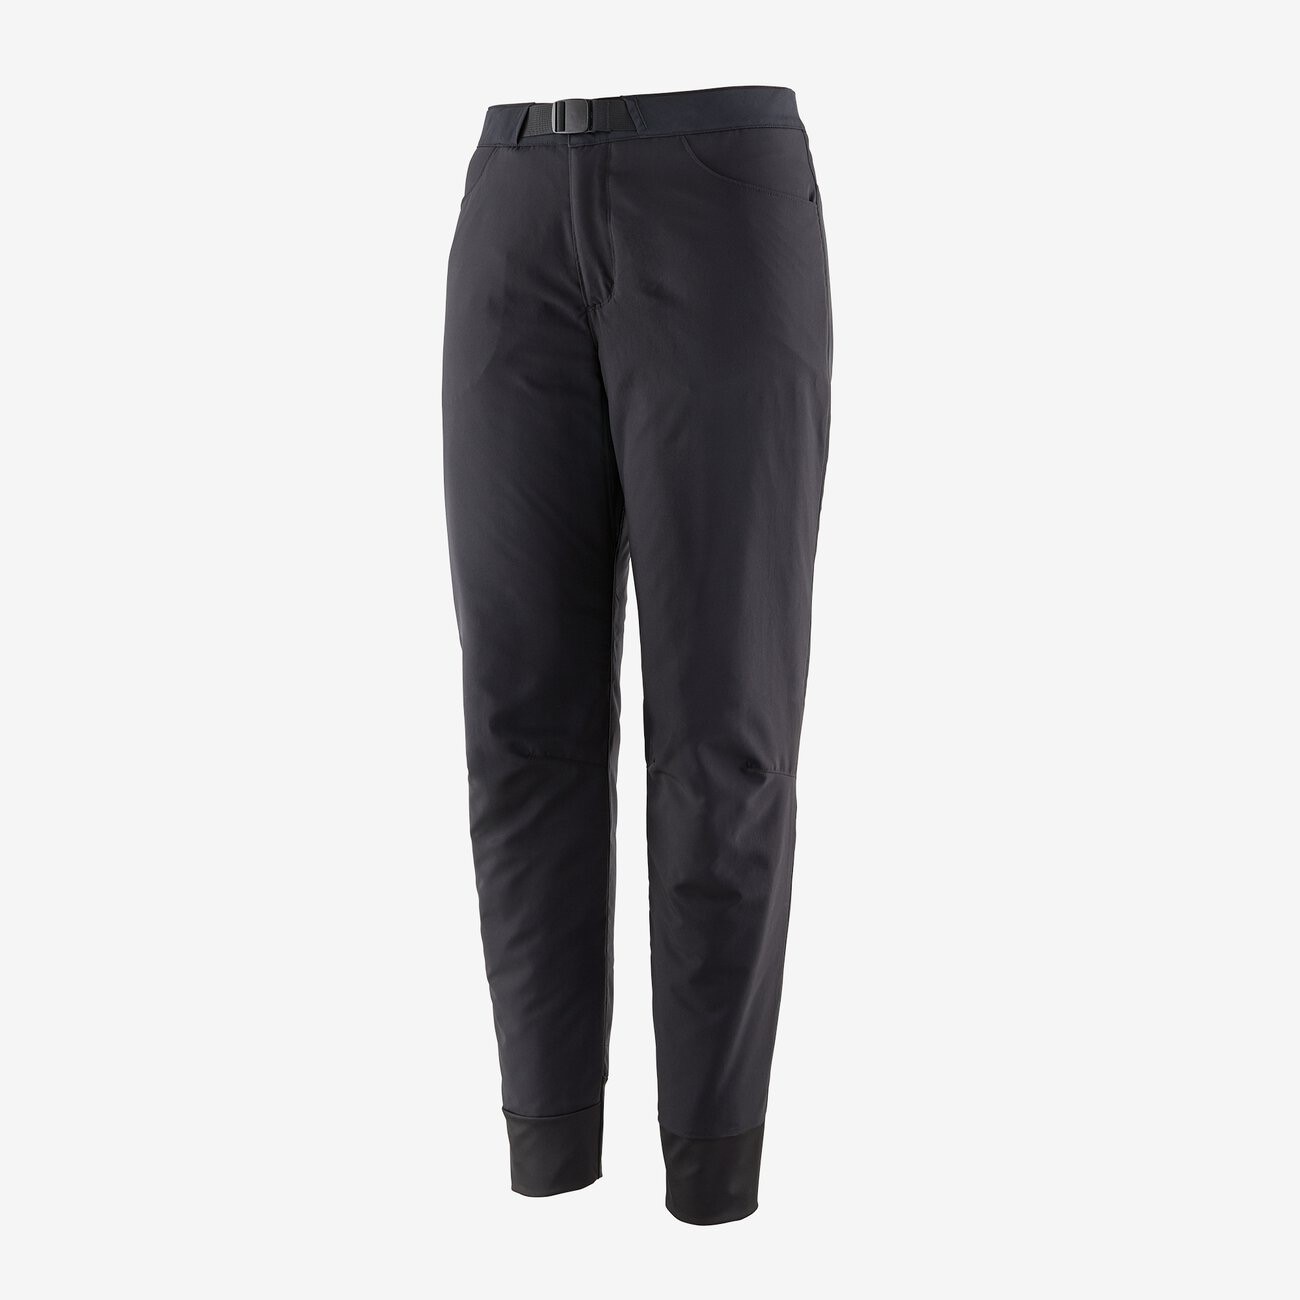 Patagonia W's Tough Puff Pants - Black - Extra Small